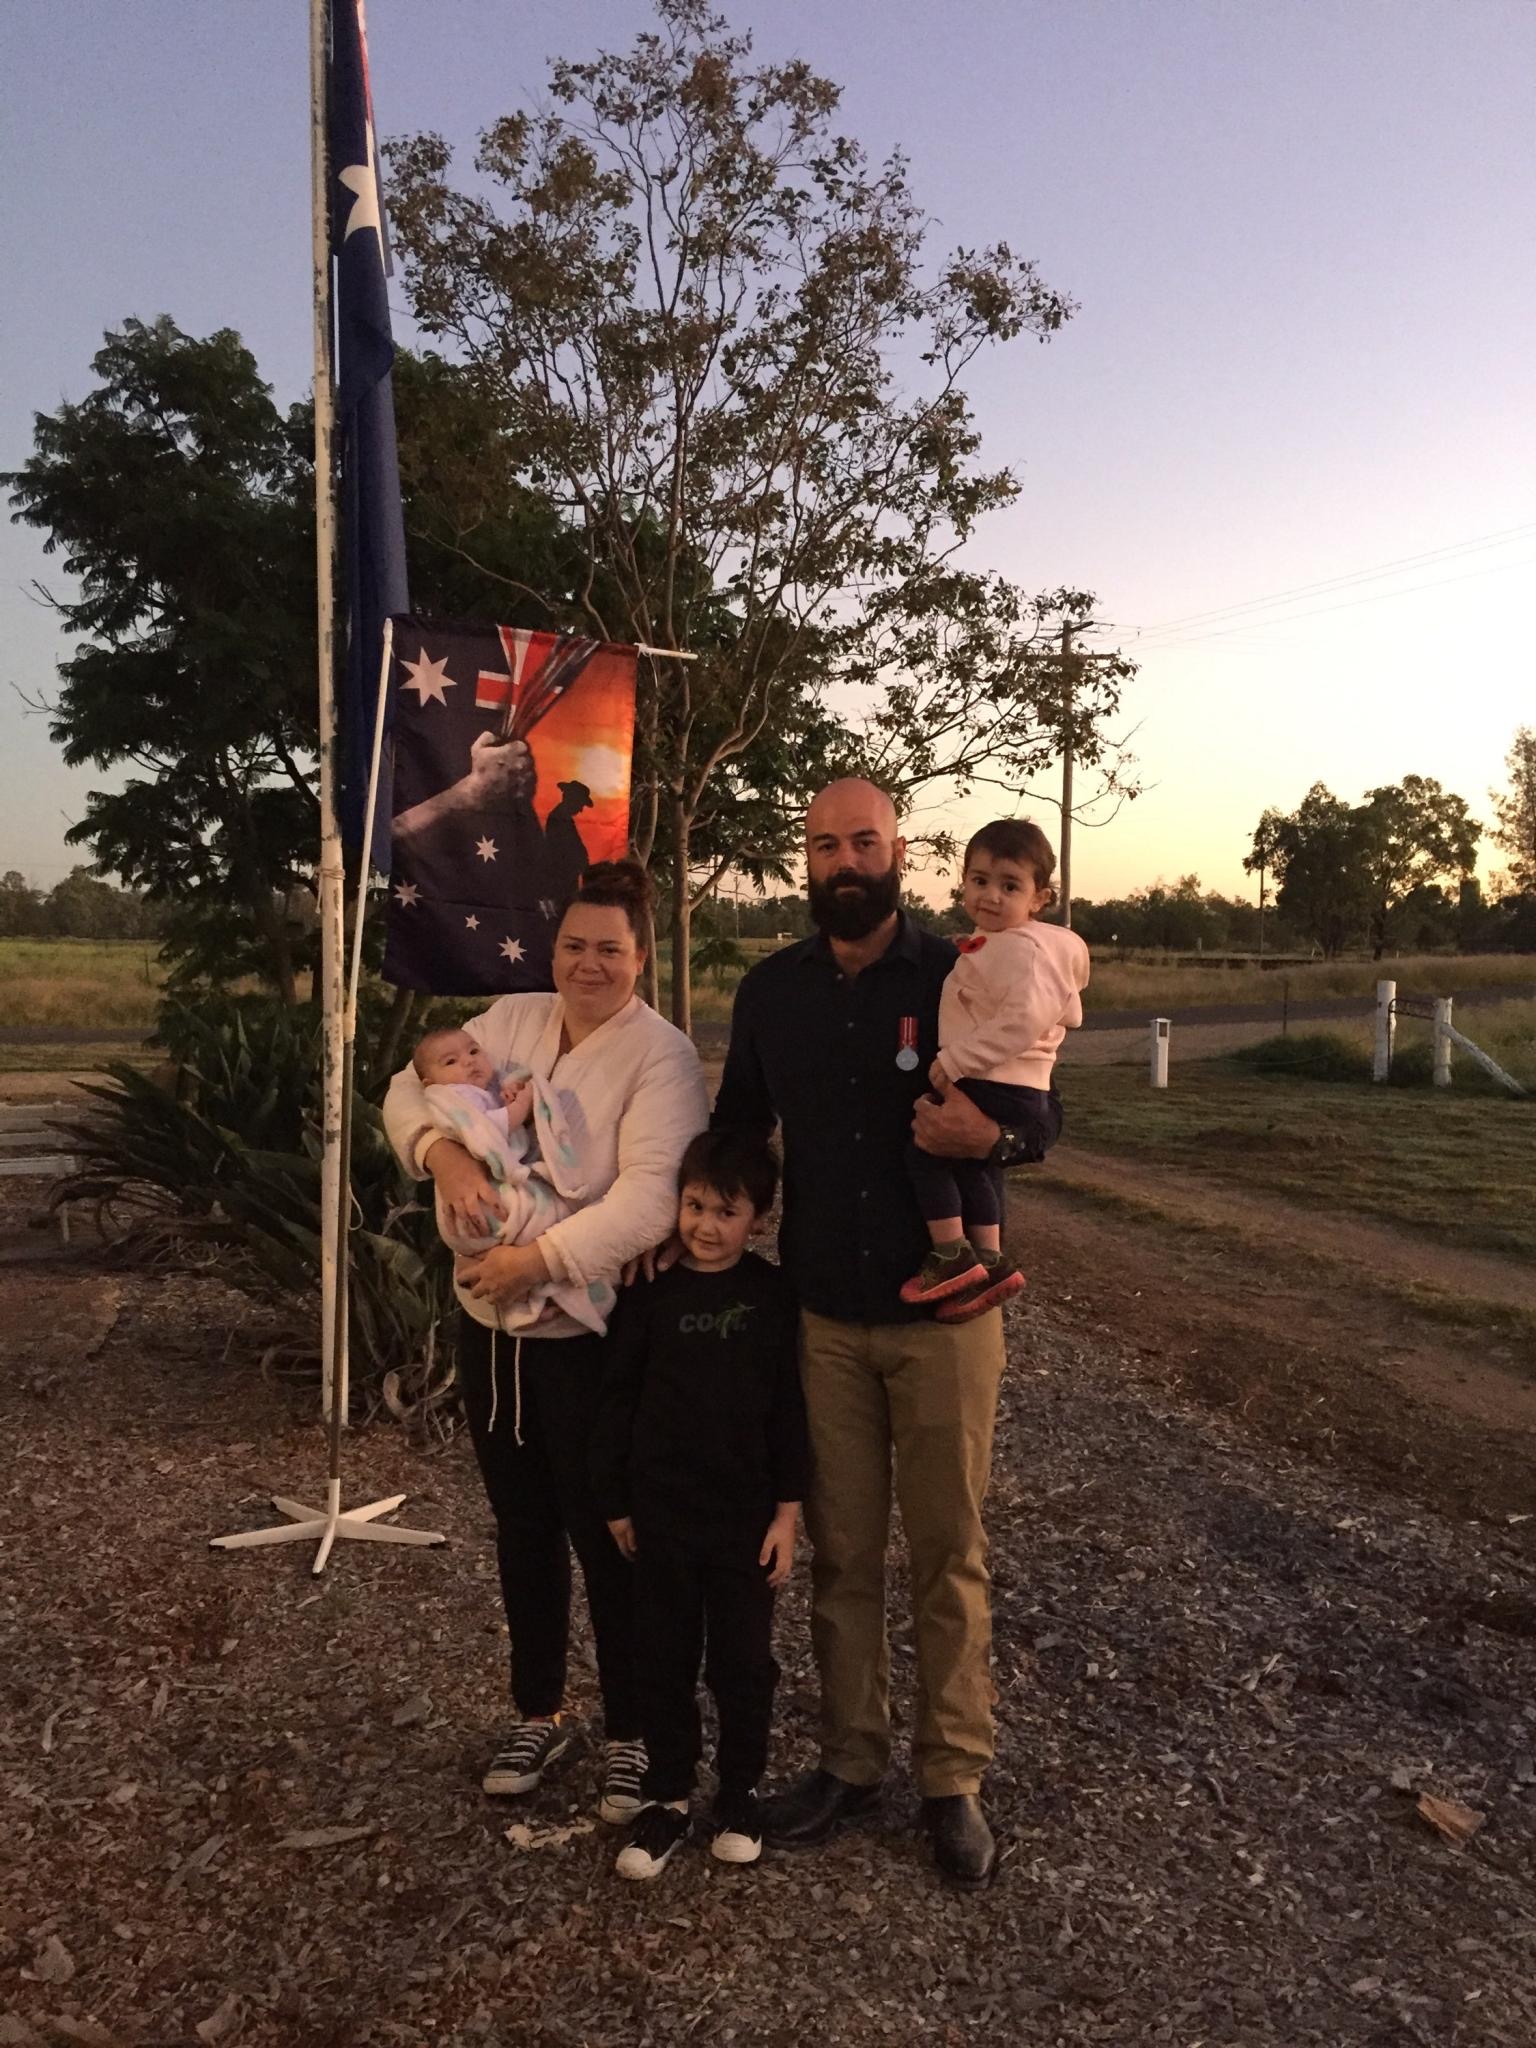 Ex-serviceman Dane Russell with his family, wife Caitlin and children Theodore, Penelope and Matilda.